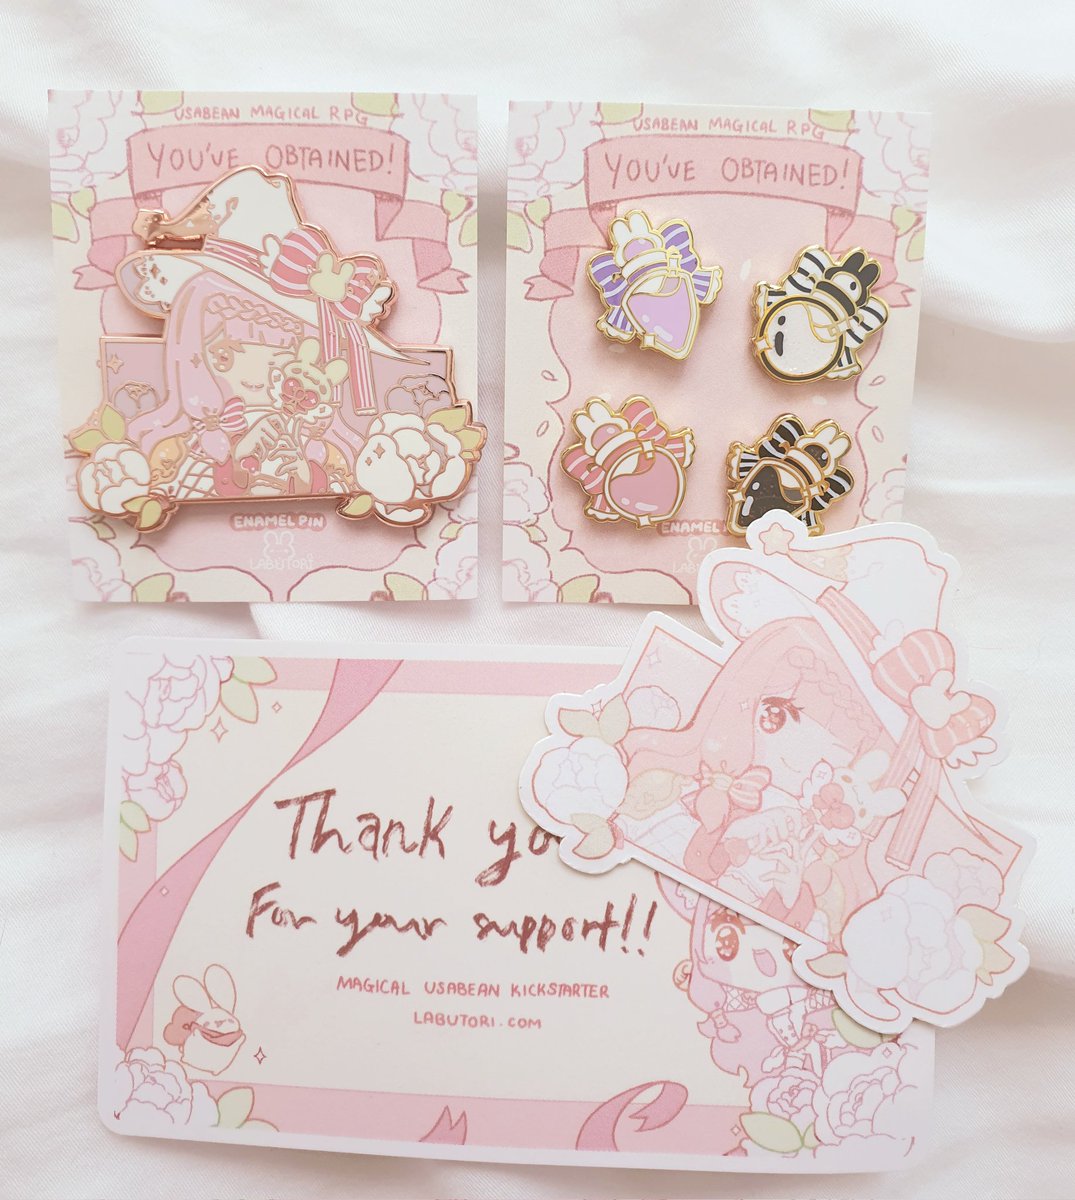 The kick from @labutori arrived!! Everything is super cute and soft 🥺💖💖💖💖 